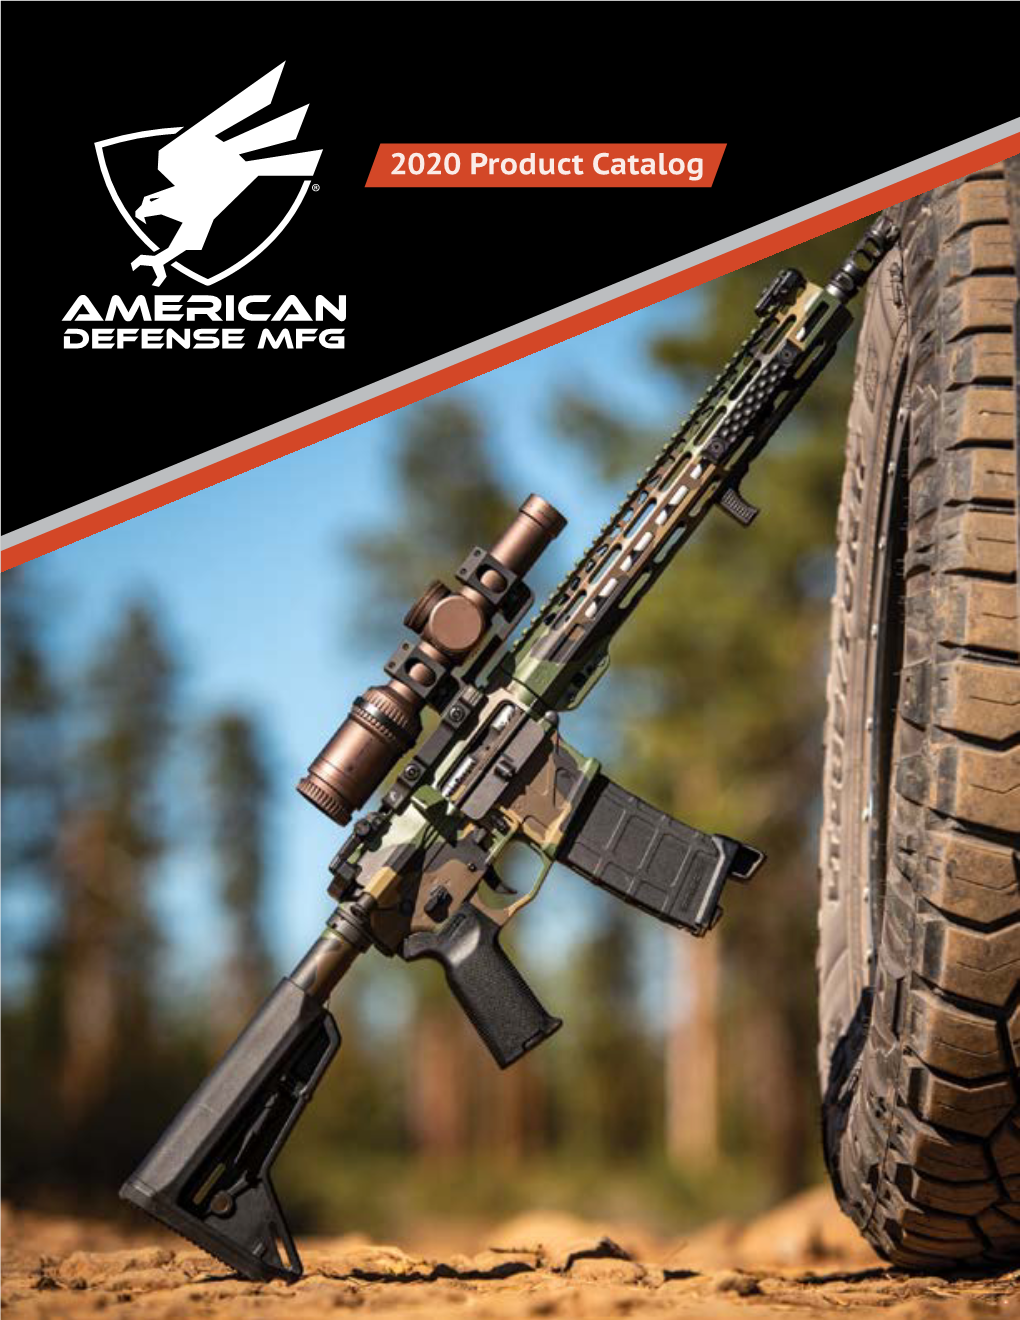 2020 Product Catalog American Defense Manufacturing Is a Leader in Contents Mounting Solutions for a Variety of Optics, Lights, Lasers and Accessories for Firearms